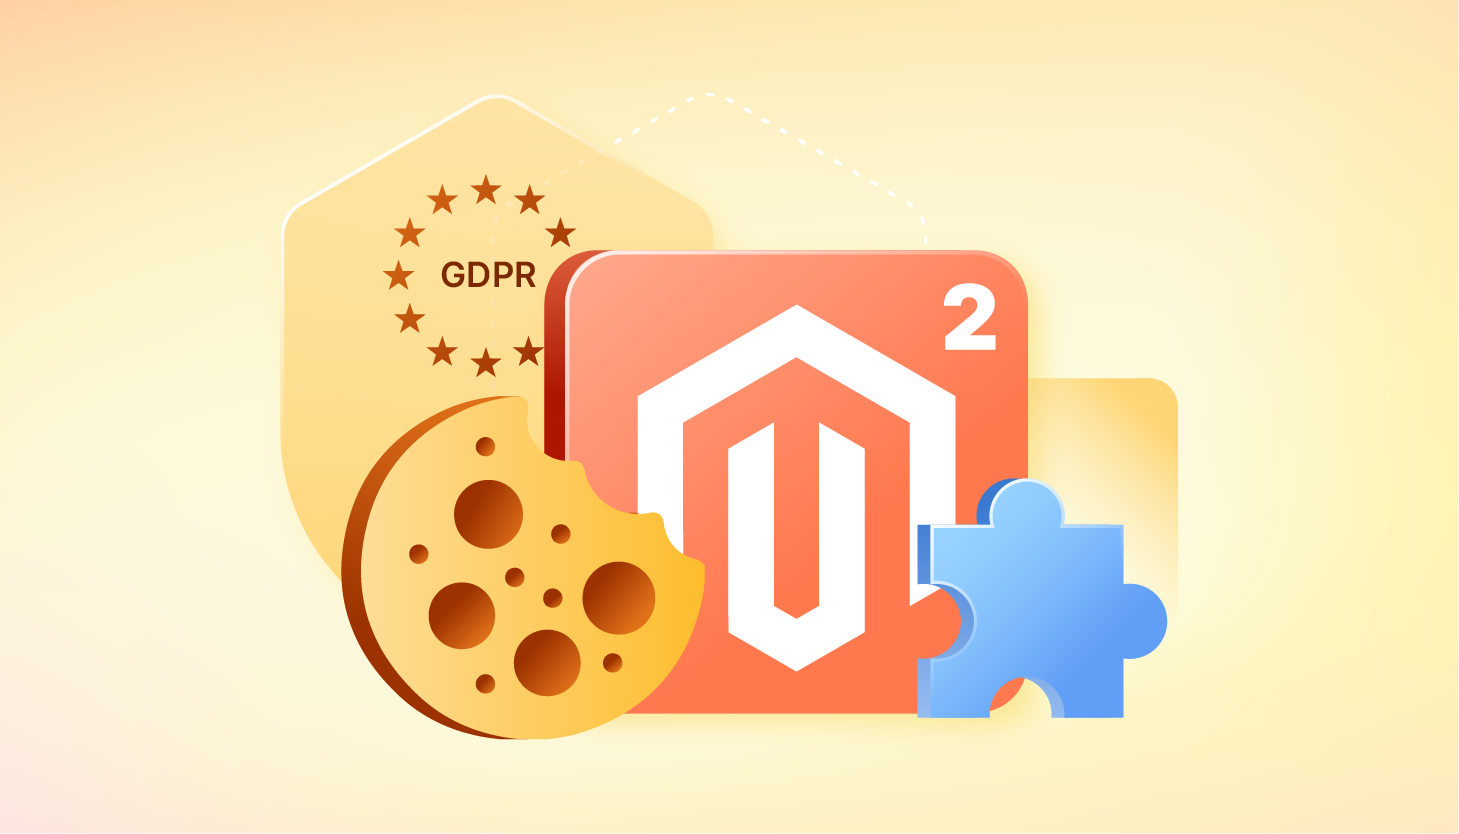 Magento 2 GDPR Cookie Notice: Steps to Configure Cookie Consent